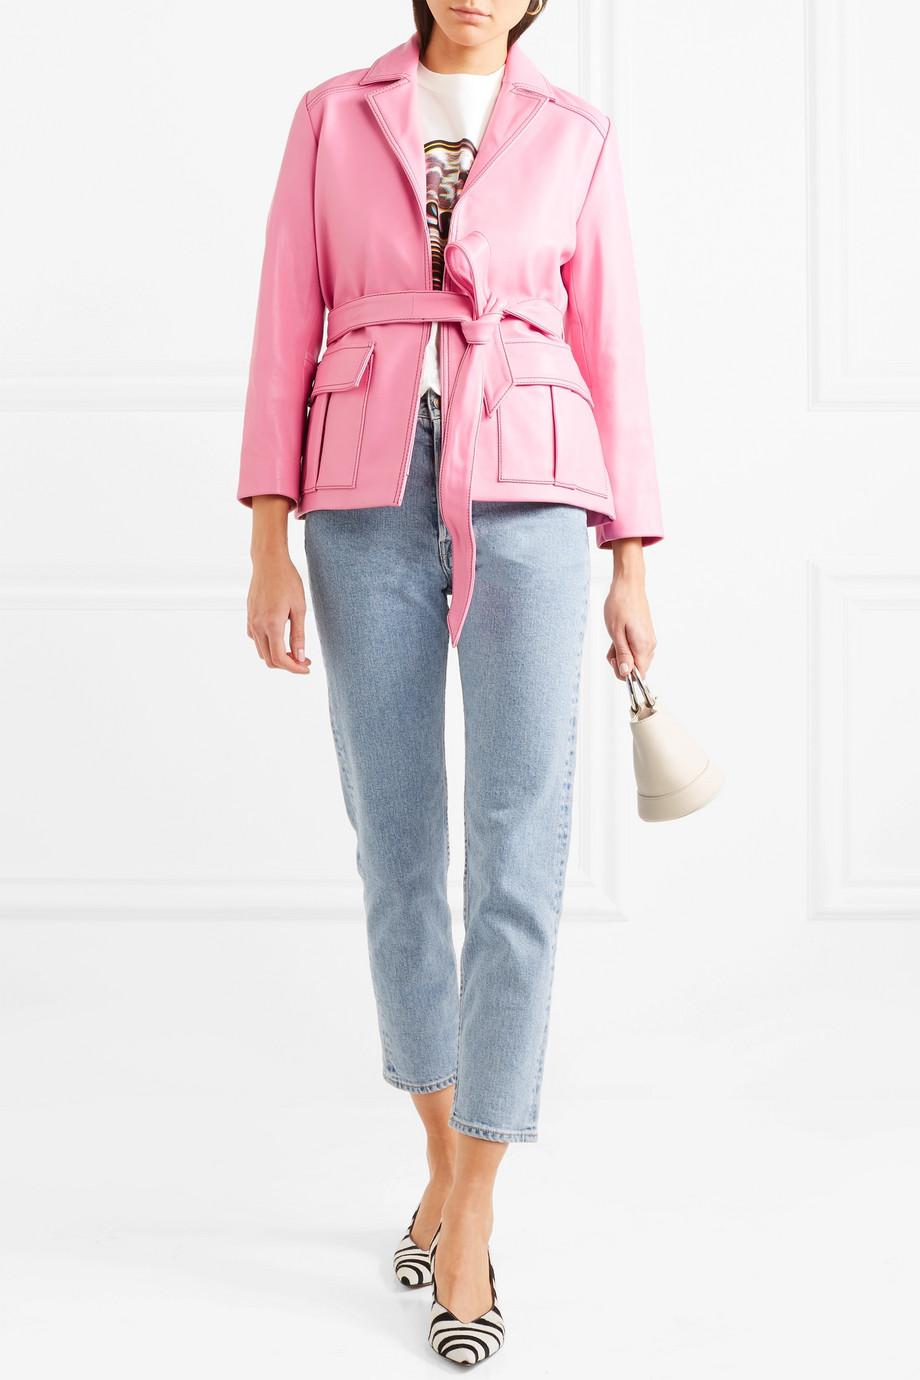 Ganni Passion Leather Jacket in Pink - Lyst